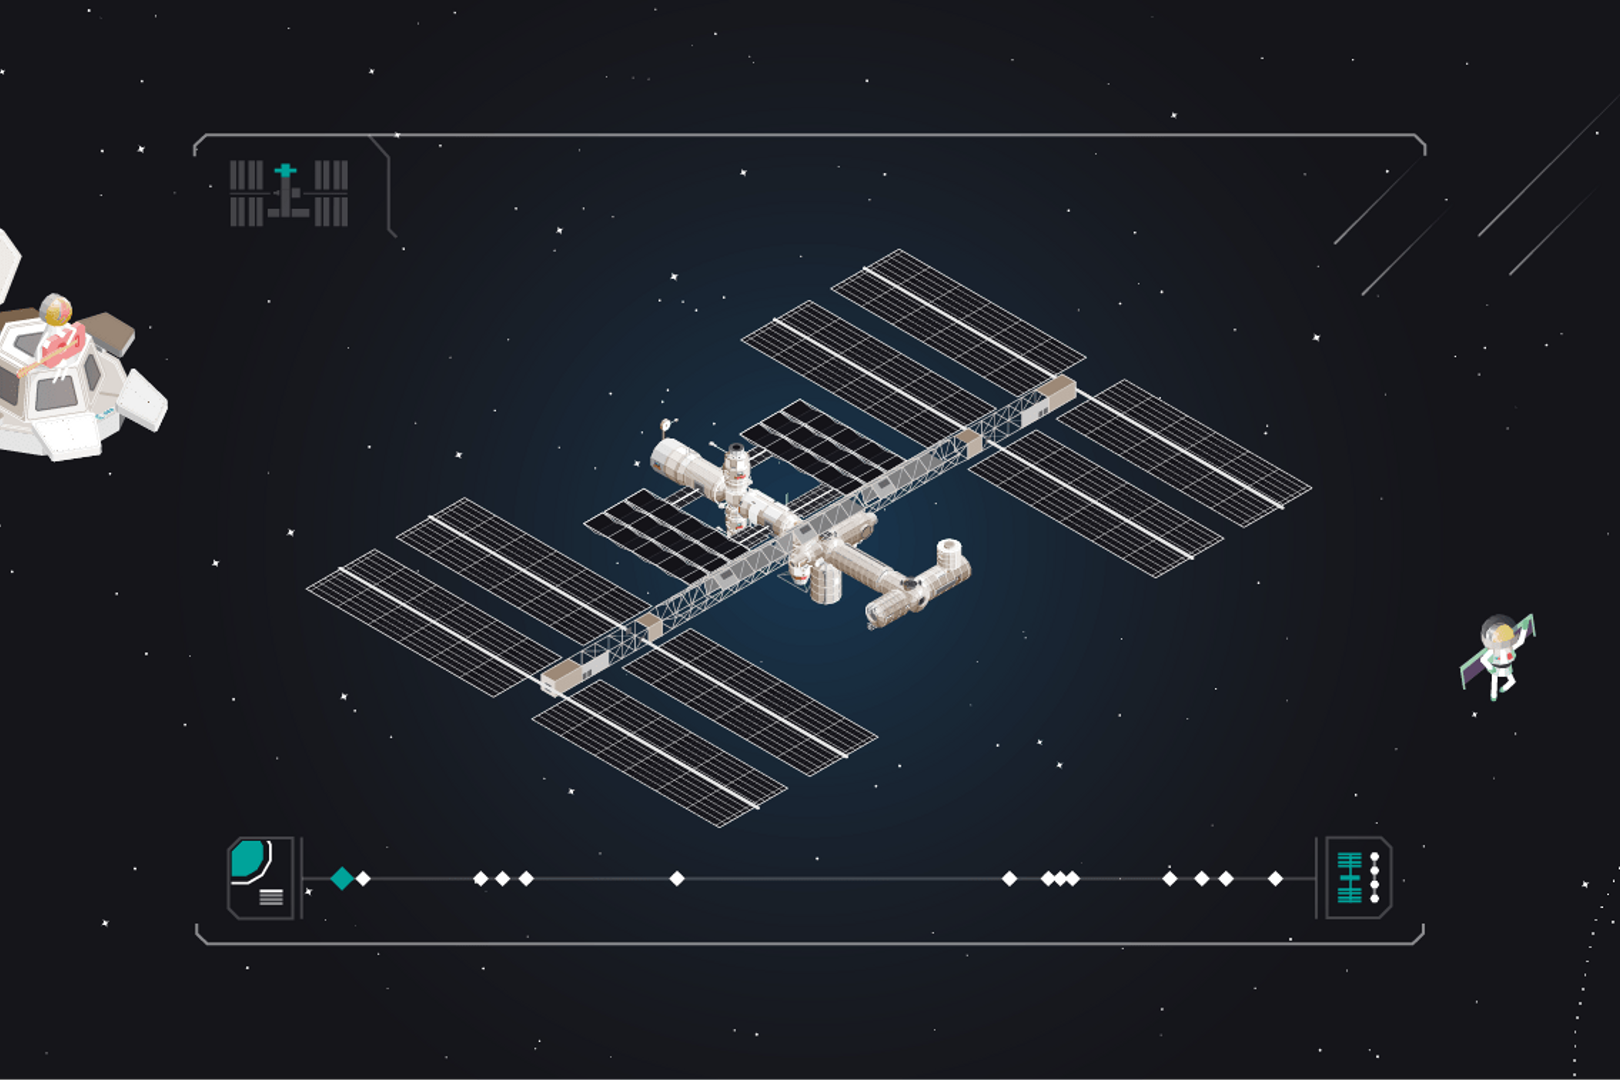 A low-poly illustration of the International Space Station floating in space. Surrounding the station are sci-fi heads up display elements. There are also other elements floating in space including a planet, an orbiting satelite and an astronaut with wings like Buzz Lightyear.